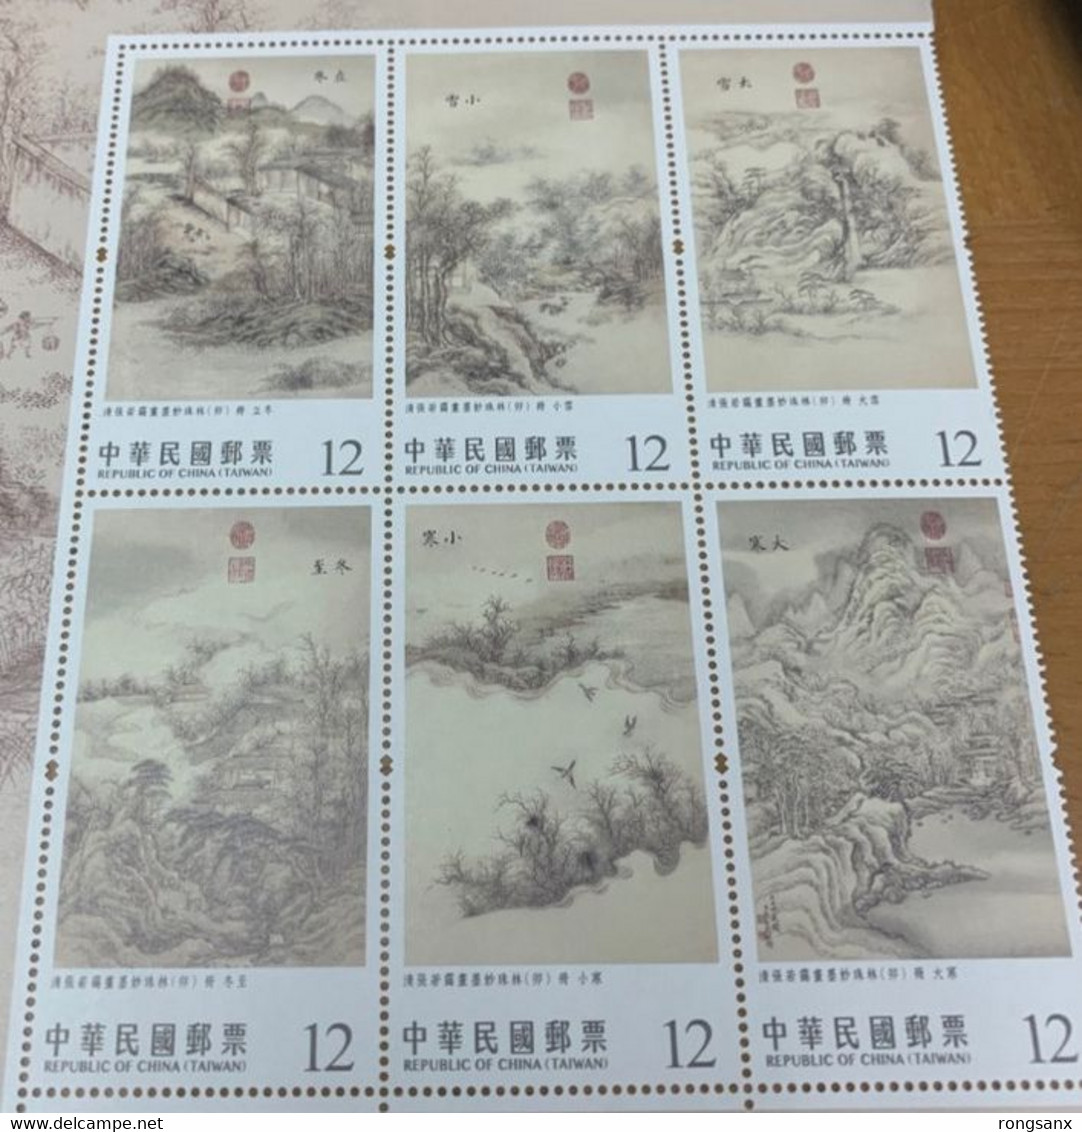 2022 TAIWAN 2022 CHINESE PAINTINGS 24 SOLAR TERMS (WINTER) BLK 6V STAMP - Storia Postale